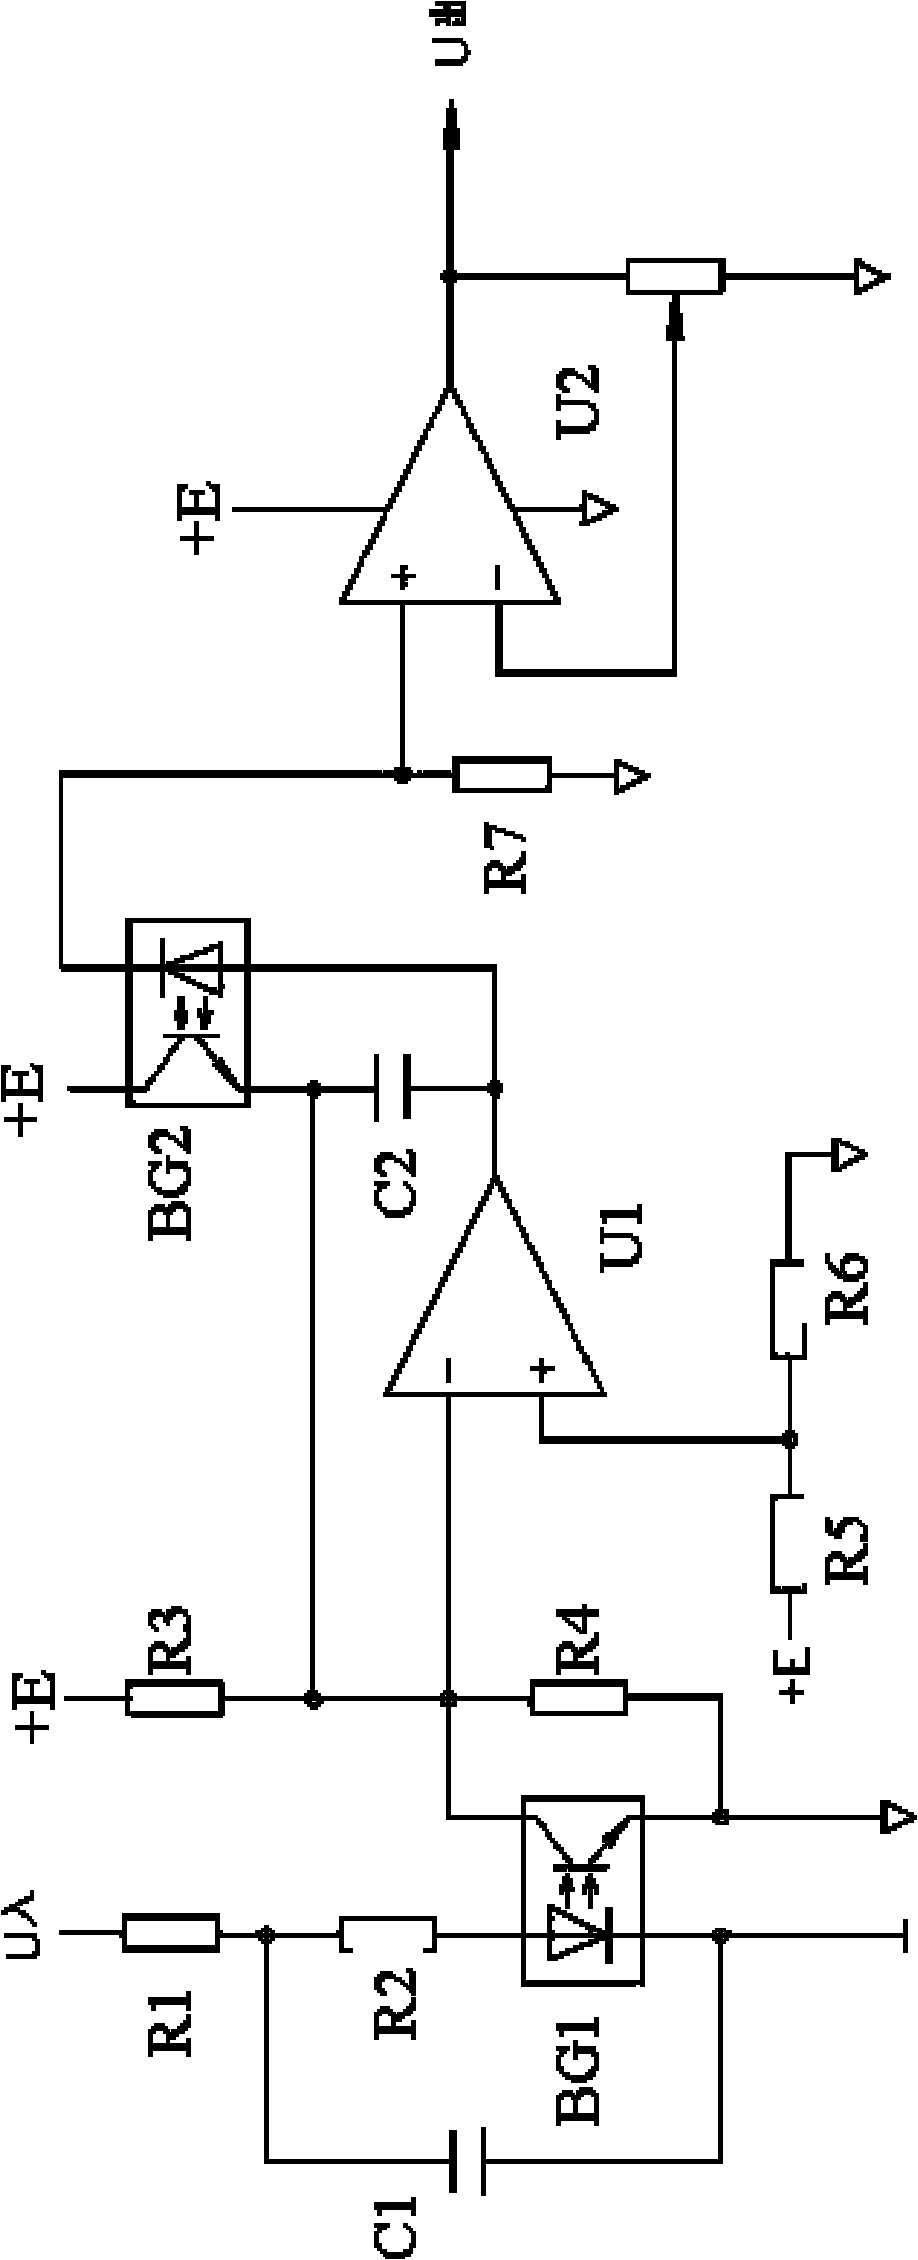 Isolation detection circuit of DC bus voltage